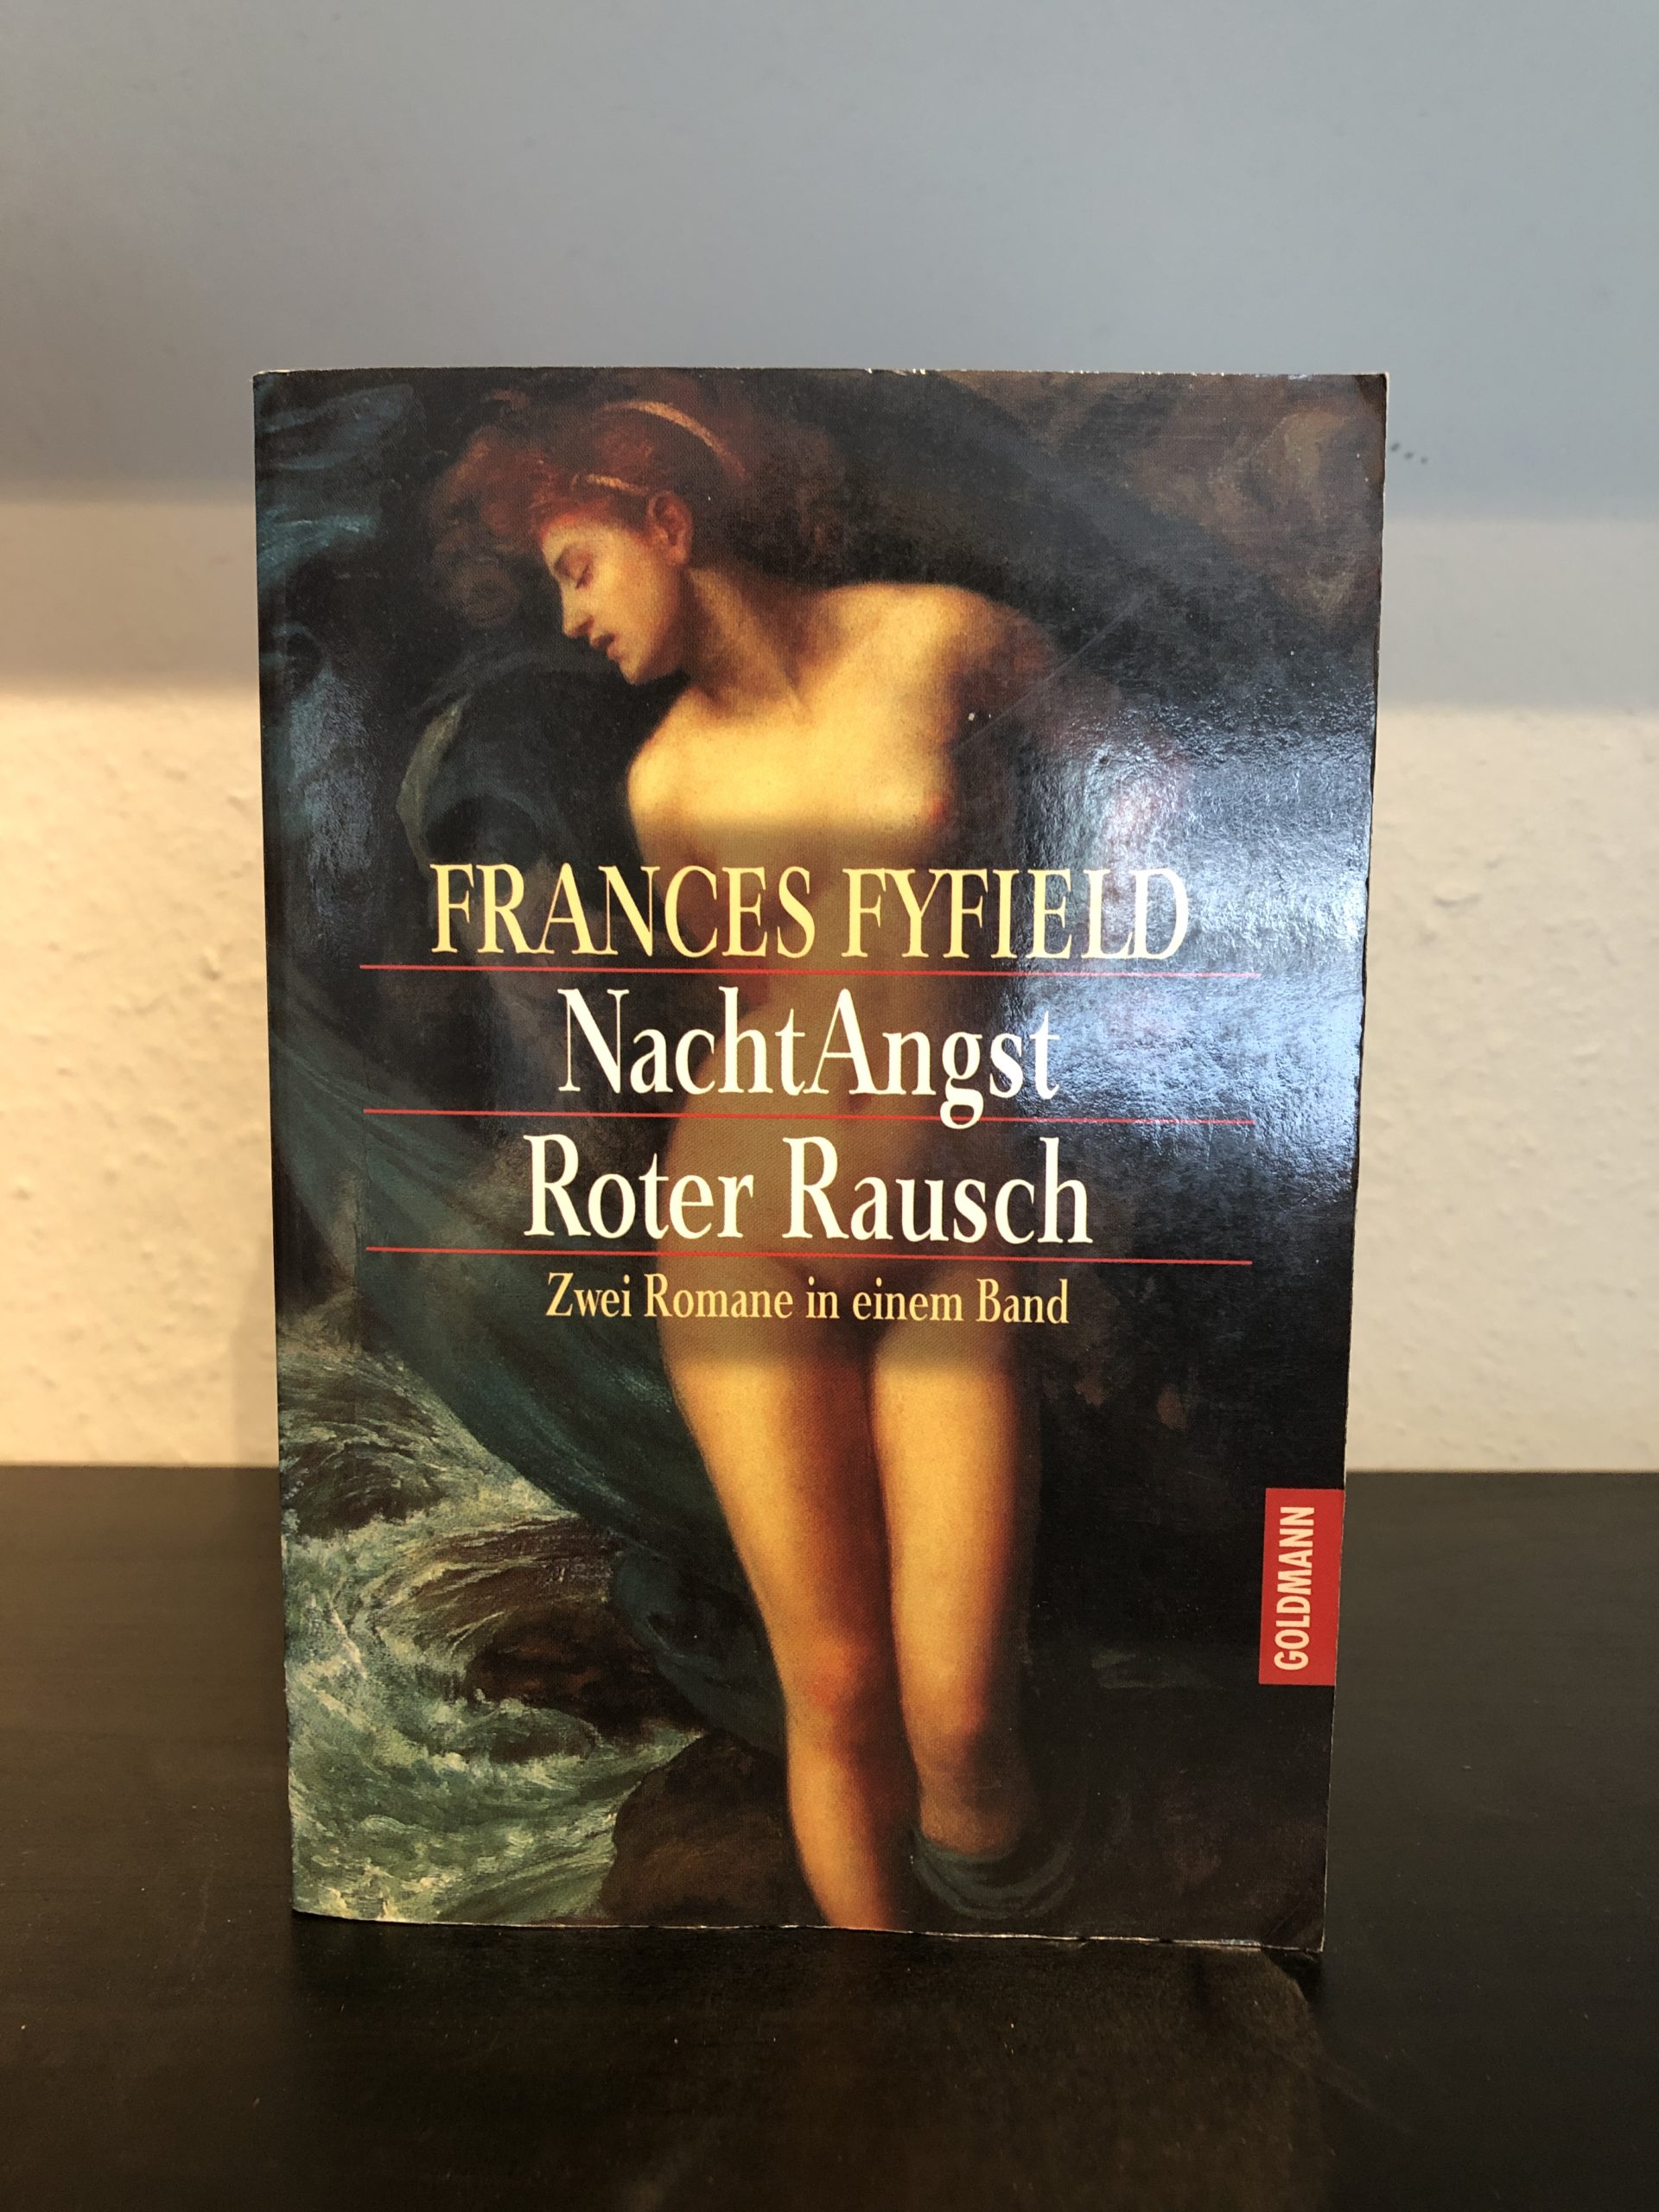 Nacht Angst; Roter Rausch - Frances Fyfield-image